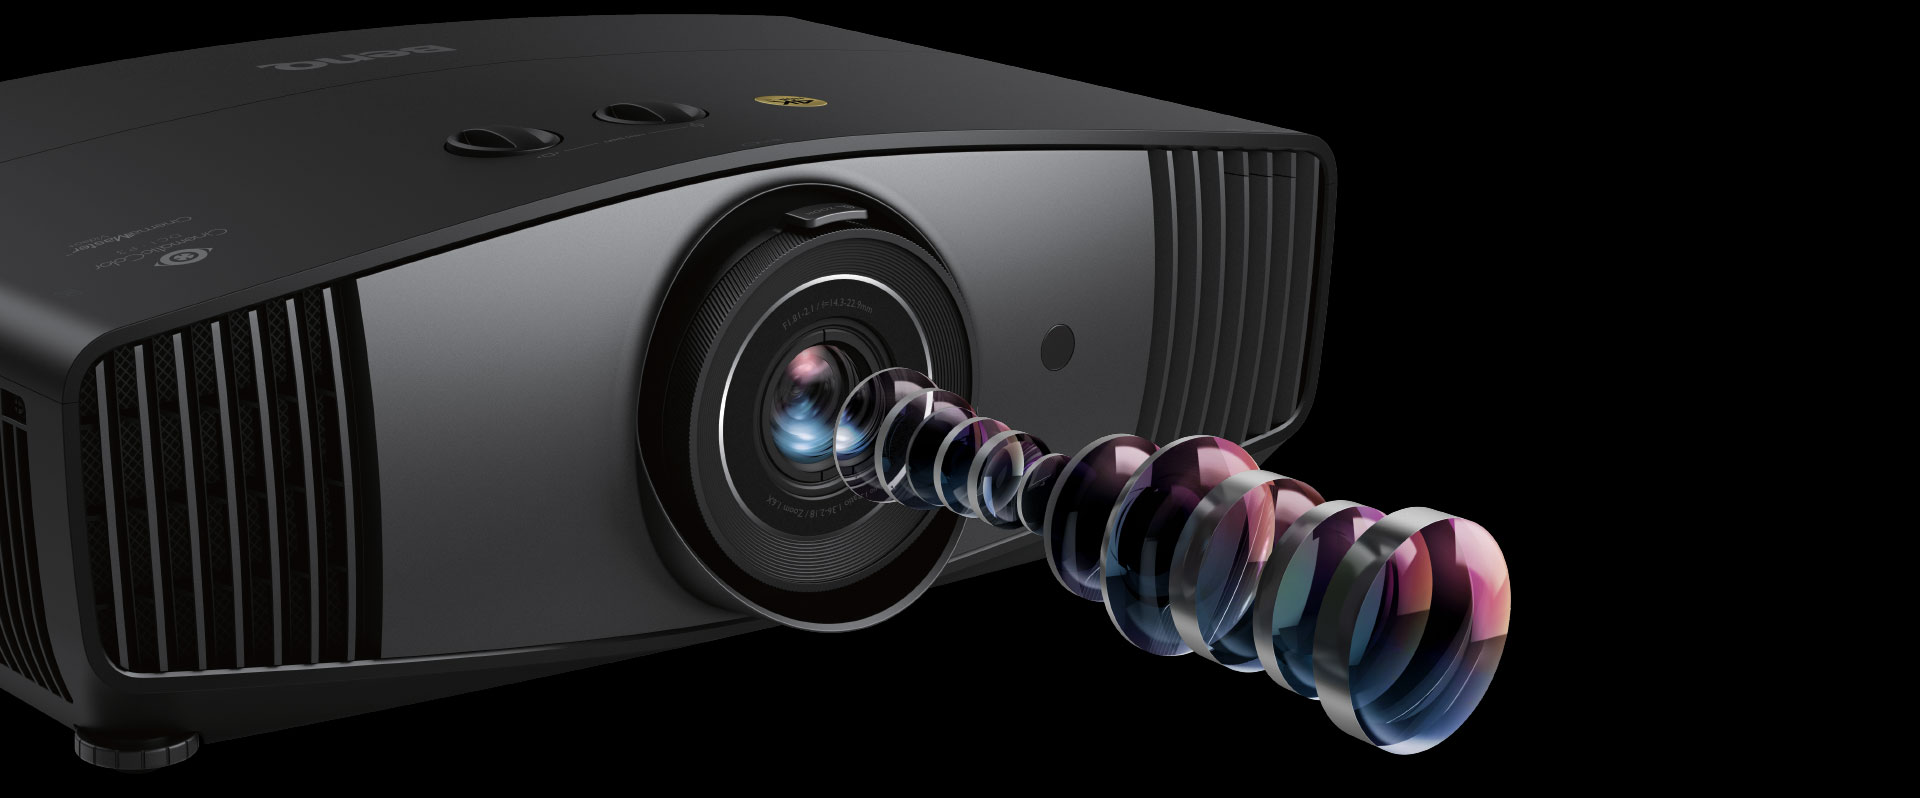 W5700 Cineprime True 4k Projector With Hdr Pro Benq Indonesia